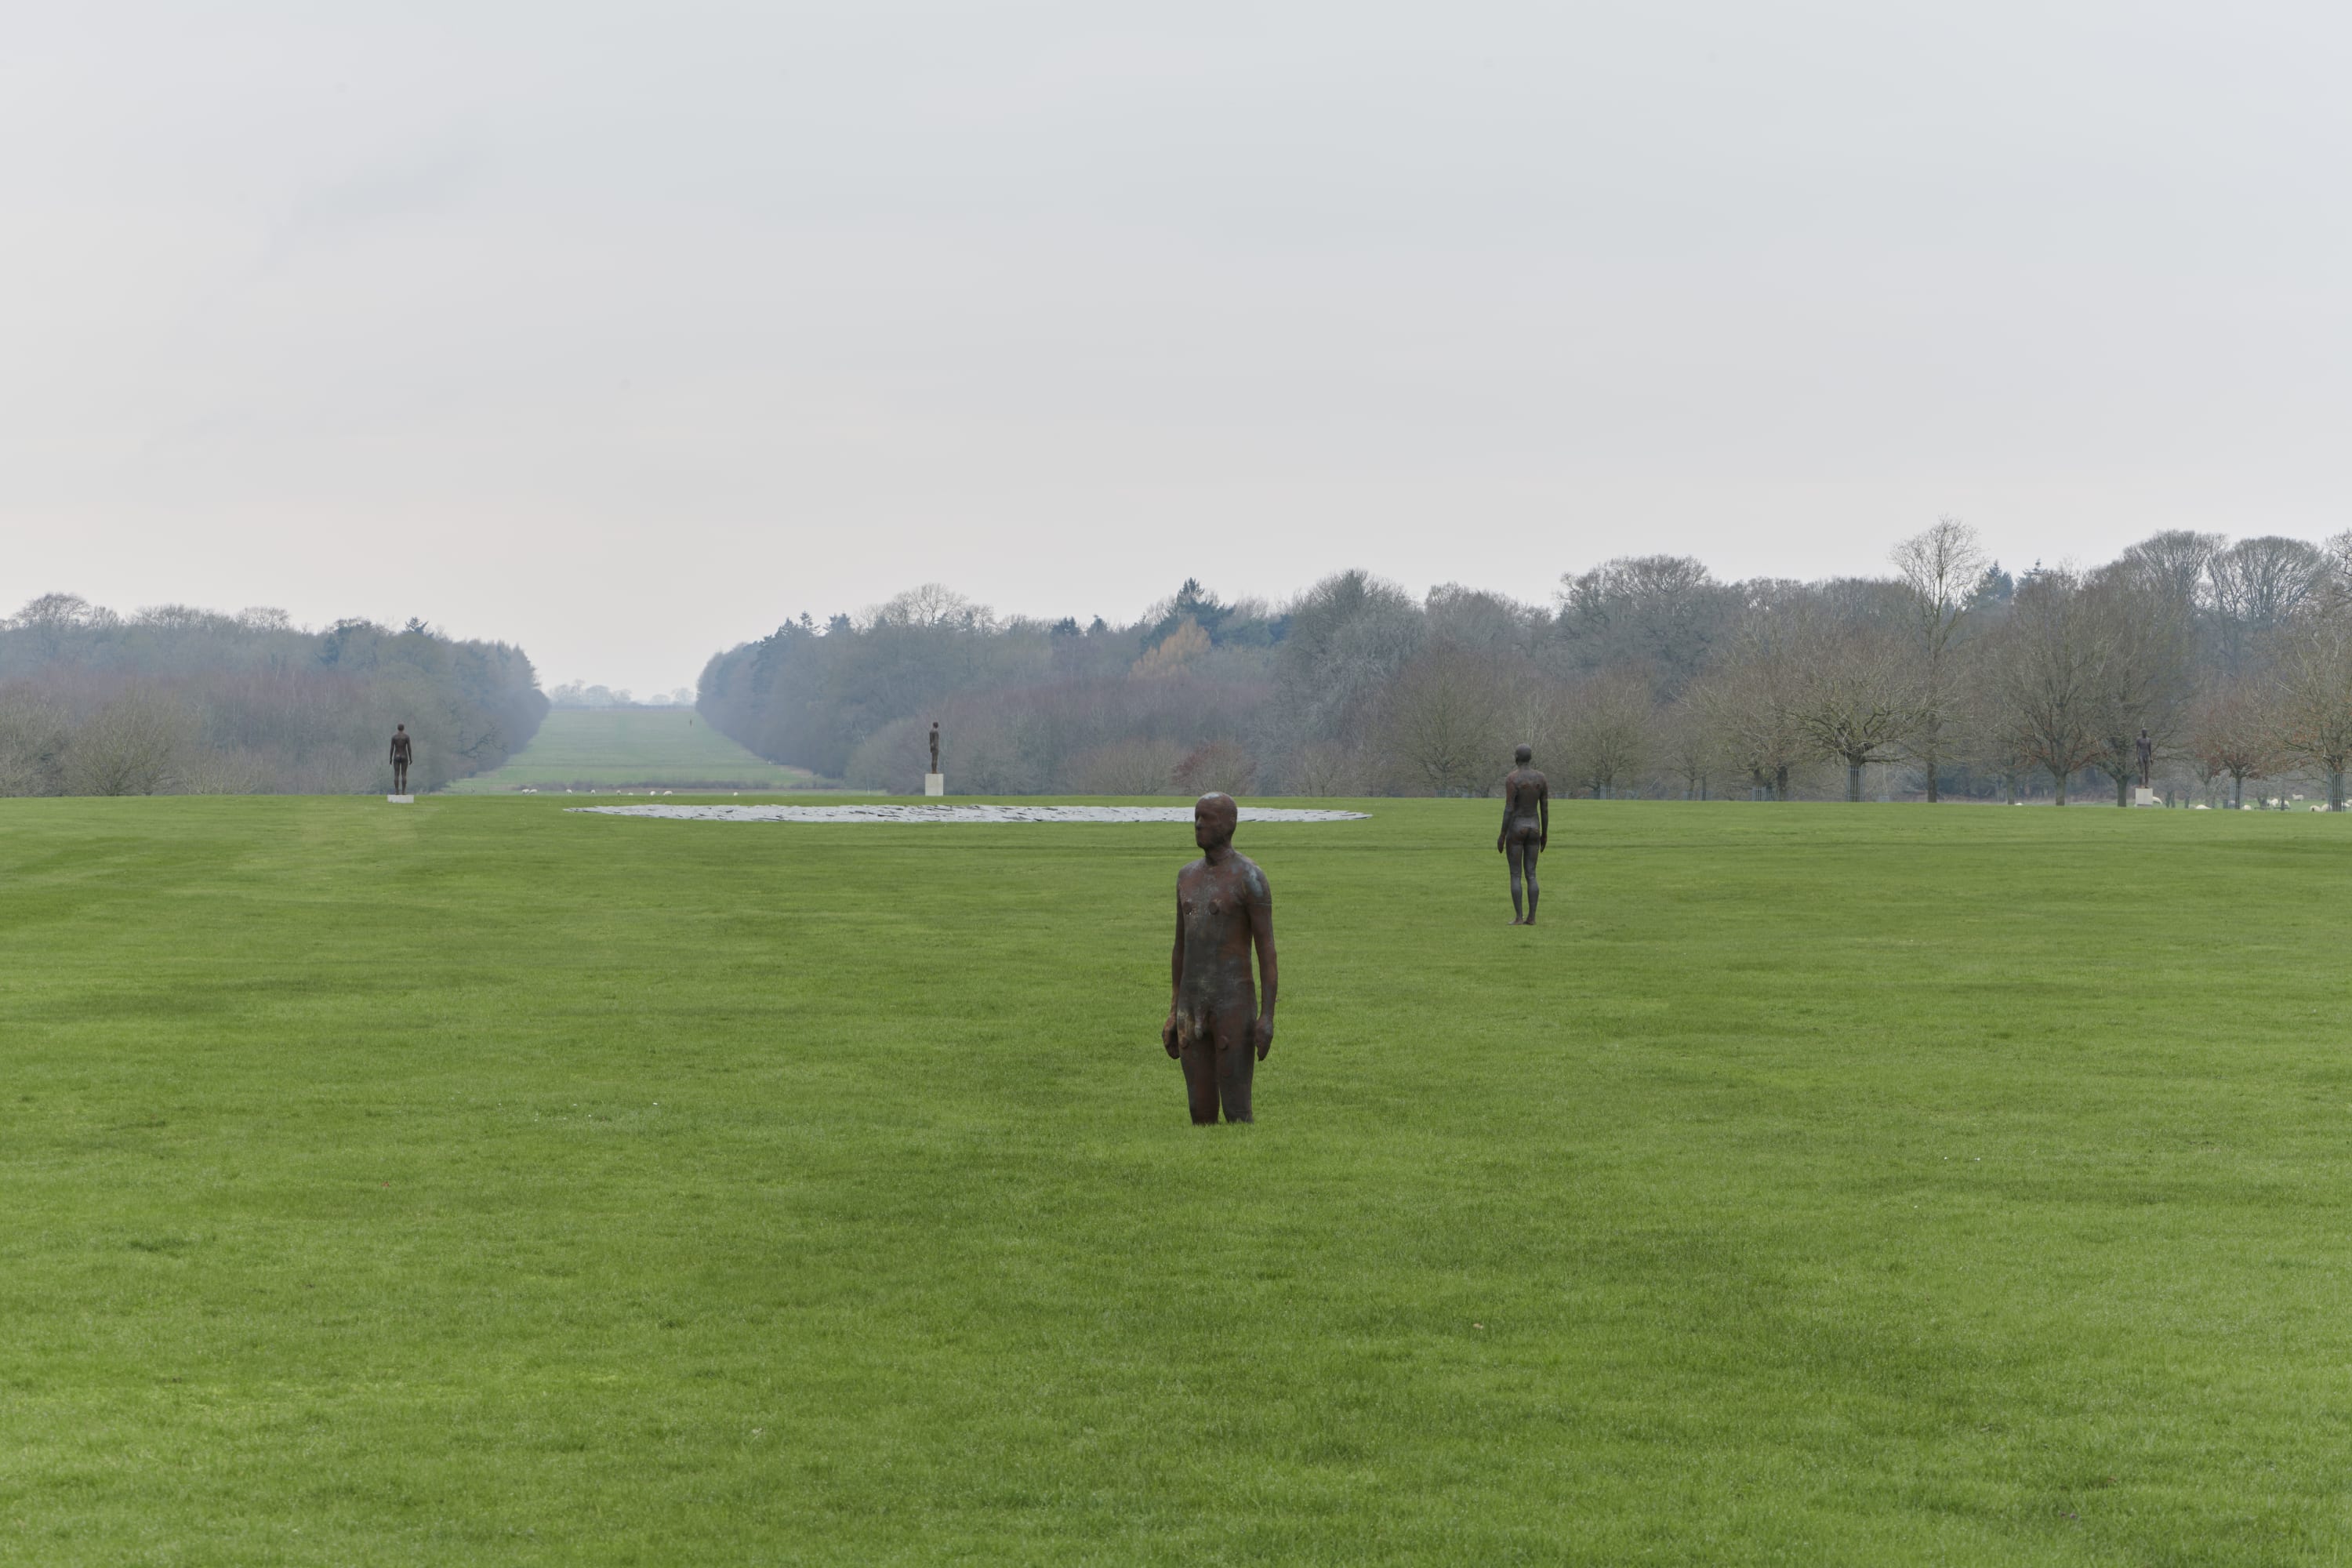 Antony Gormley changed how I think about art Review of 'Time Horizon' at Houghton Hall